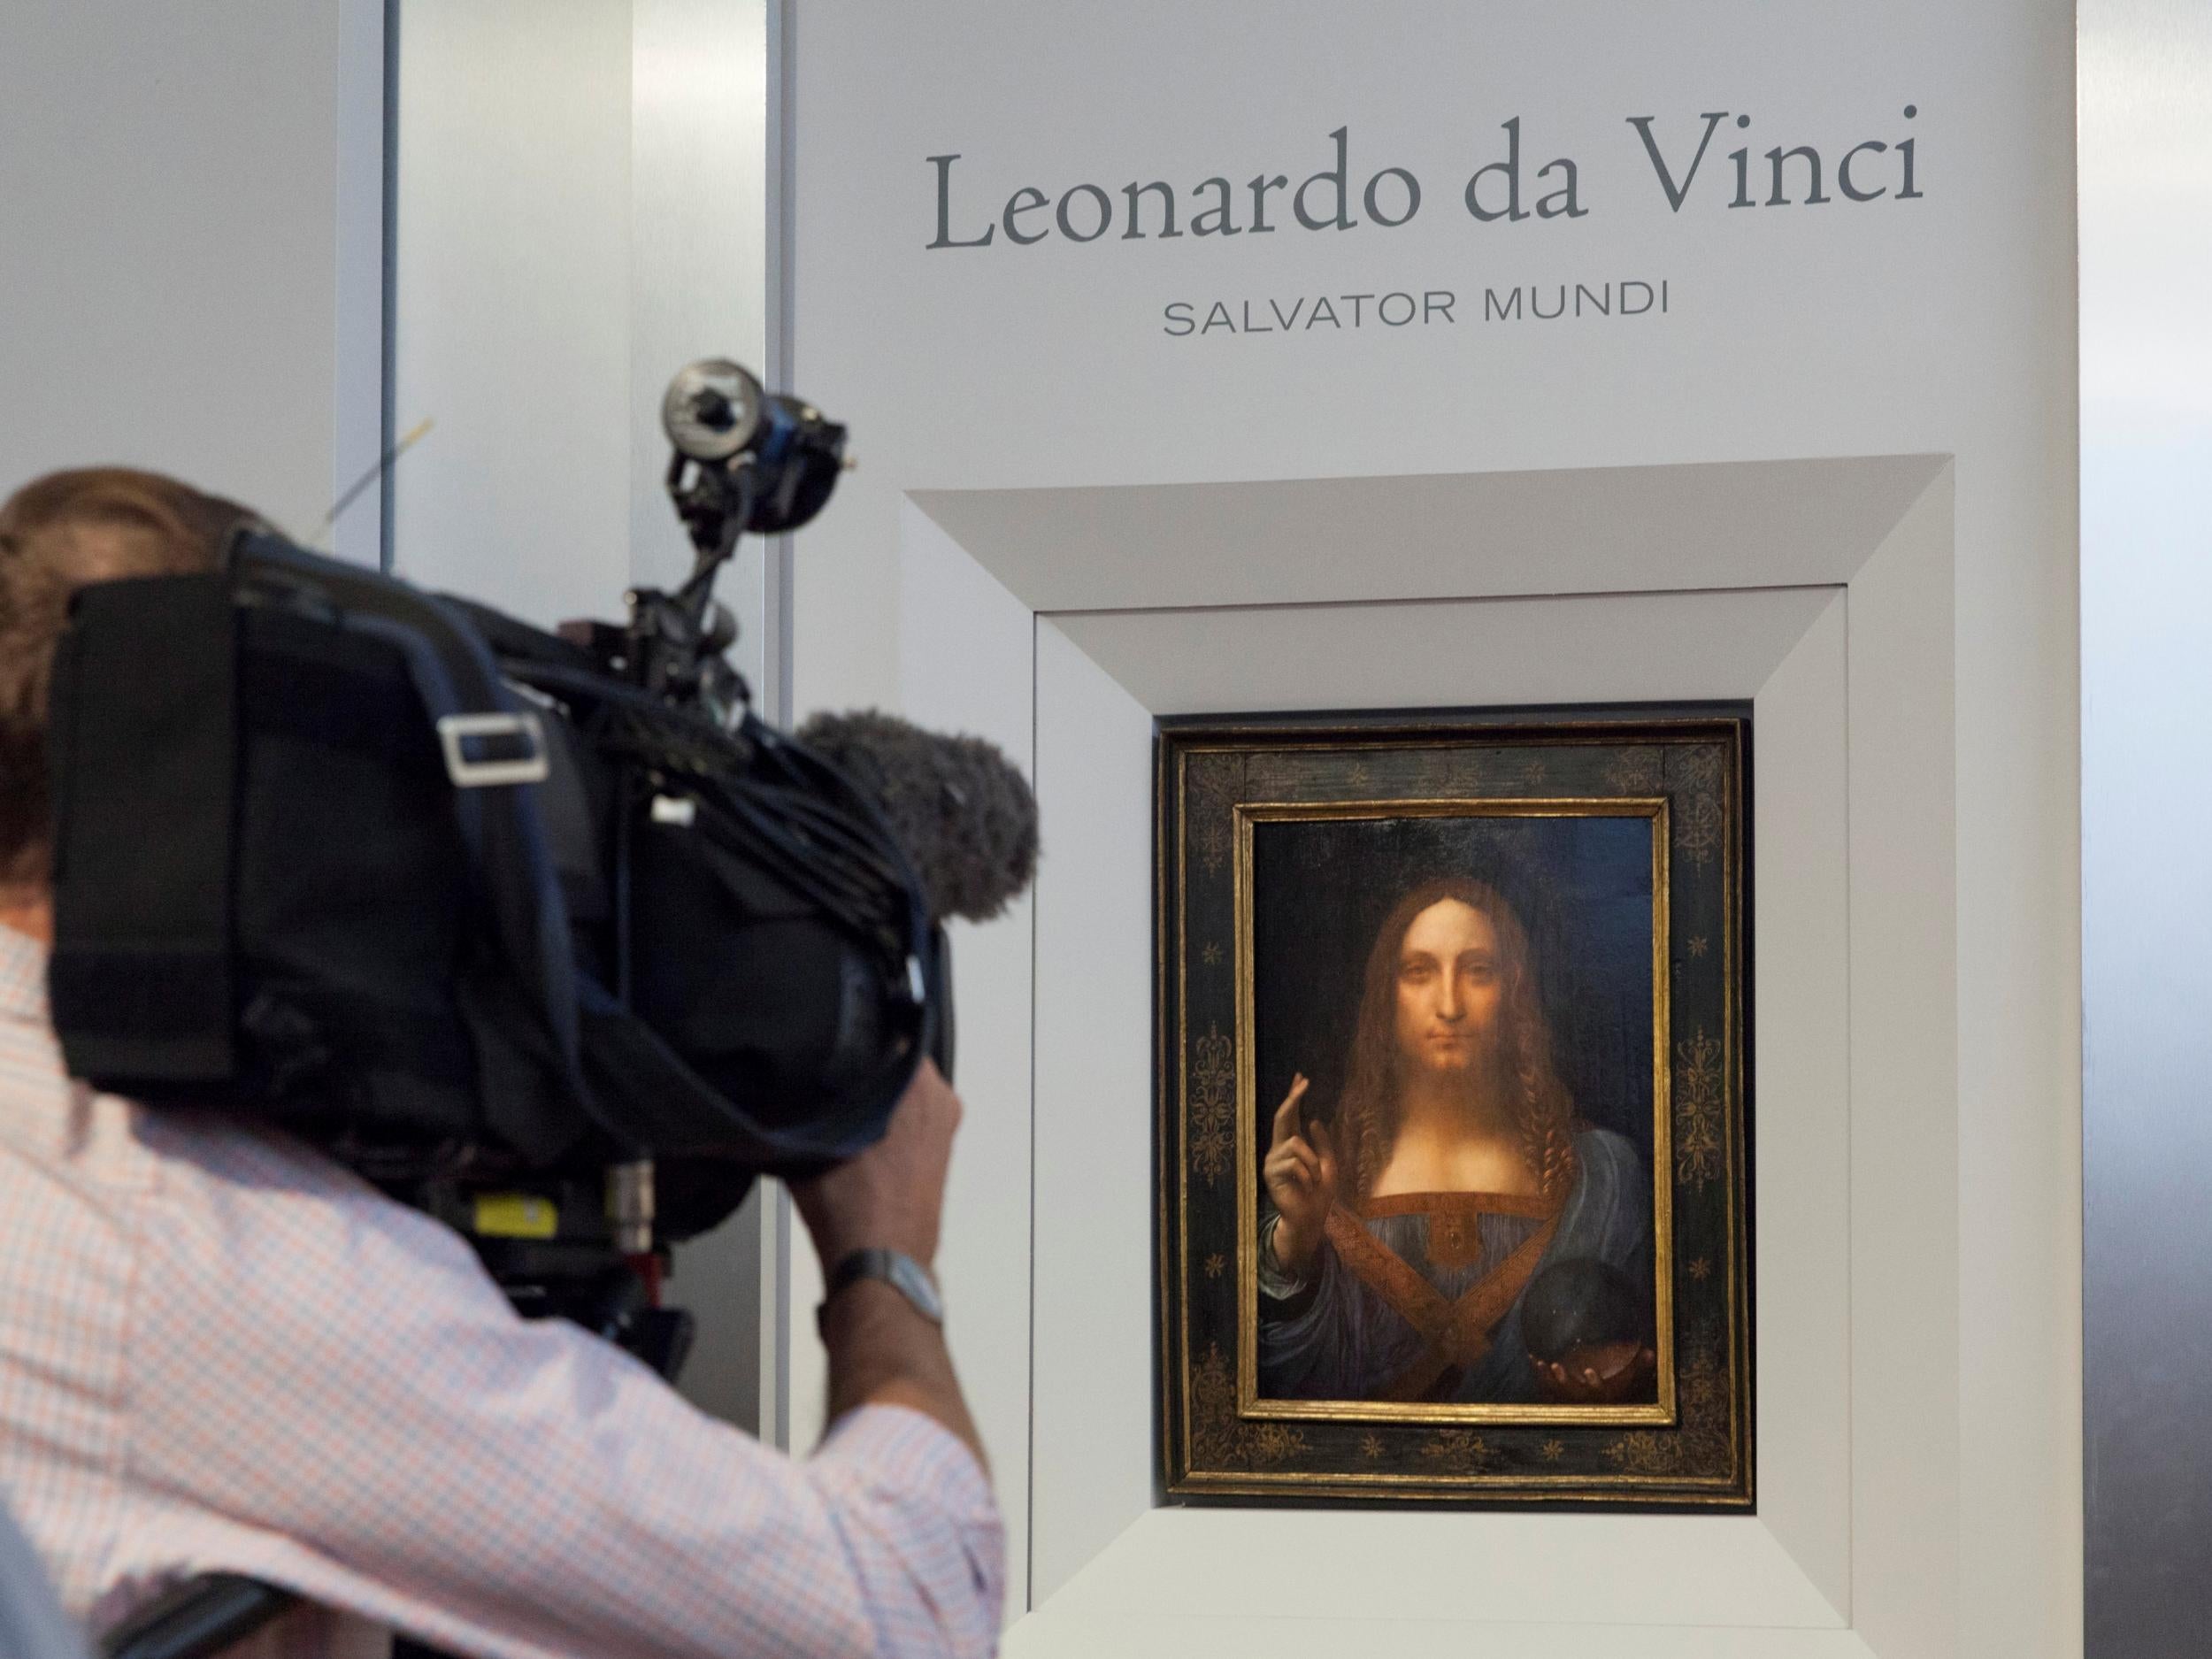 "Salvator Mundi", an ethereal portrait of Jesus Christ that dates to about 1500, the last privately-owned Leonardo da Vinci painting, is on display for media at Christie's auction in New York